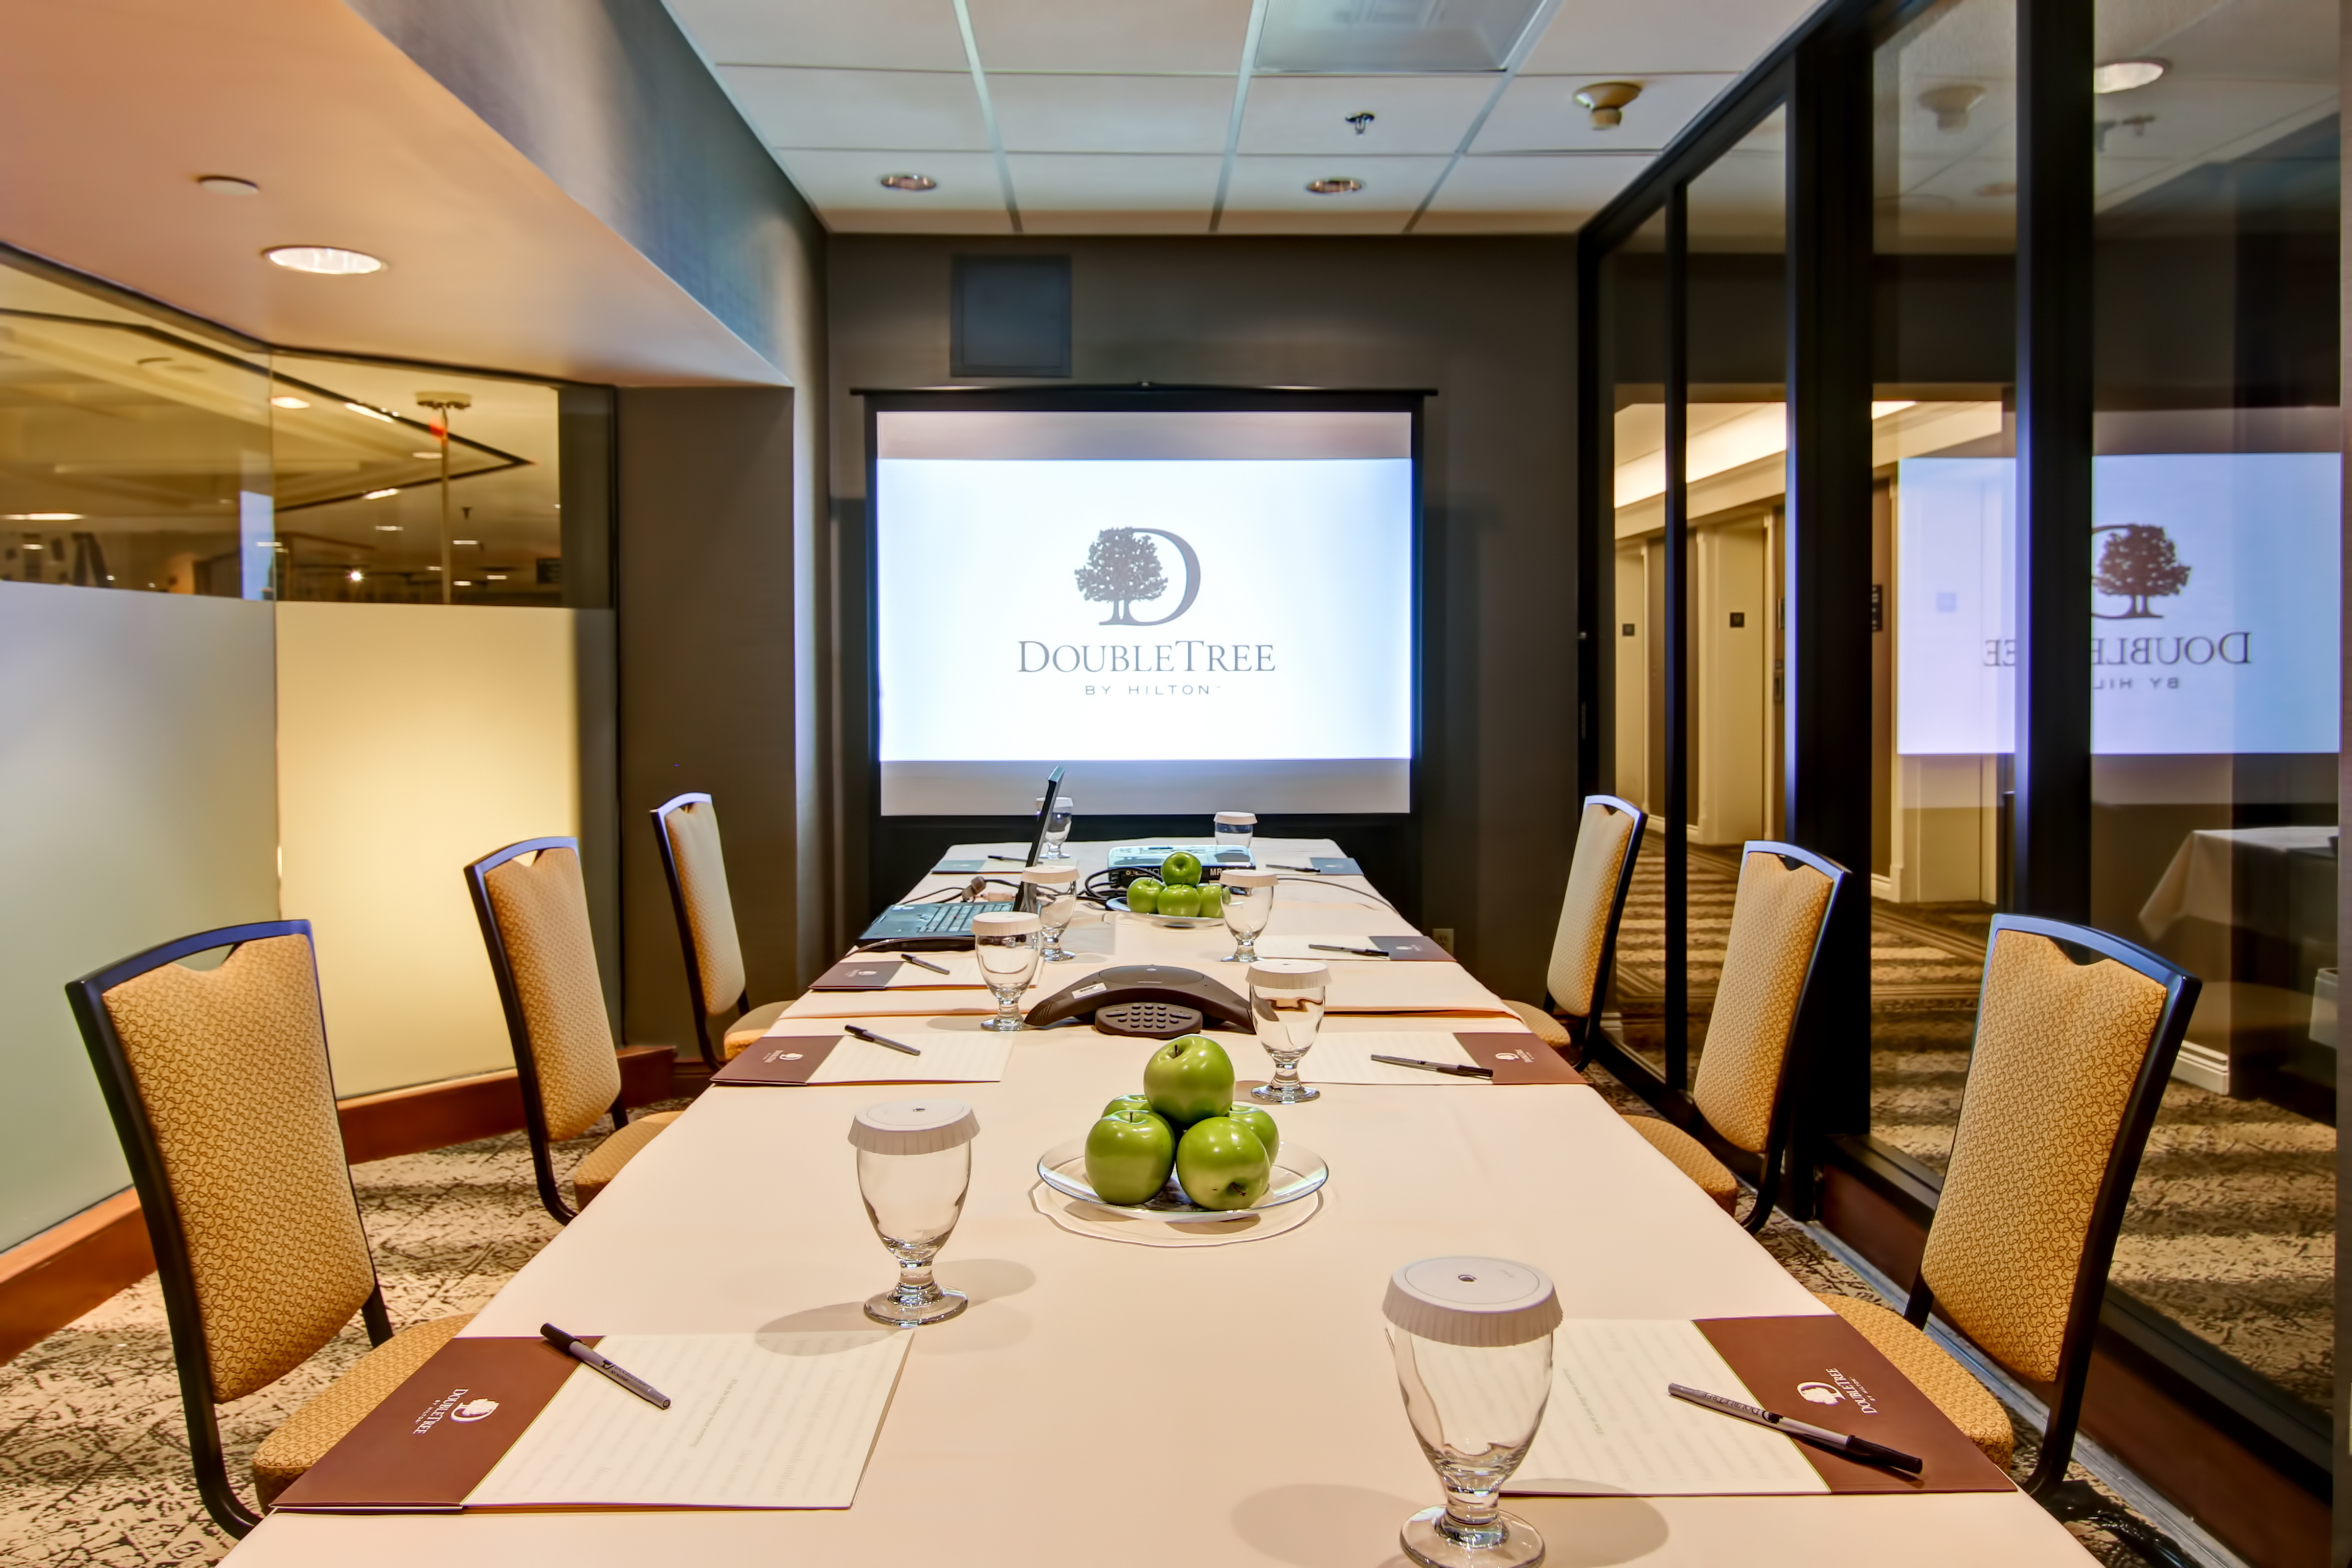 Small Conference Meeting Room with Seats, Projector Screen and Table with Notepads